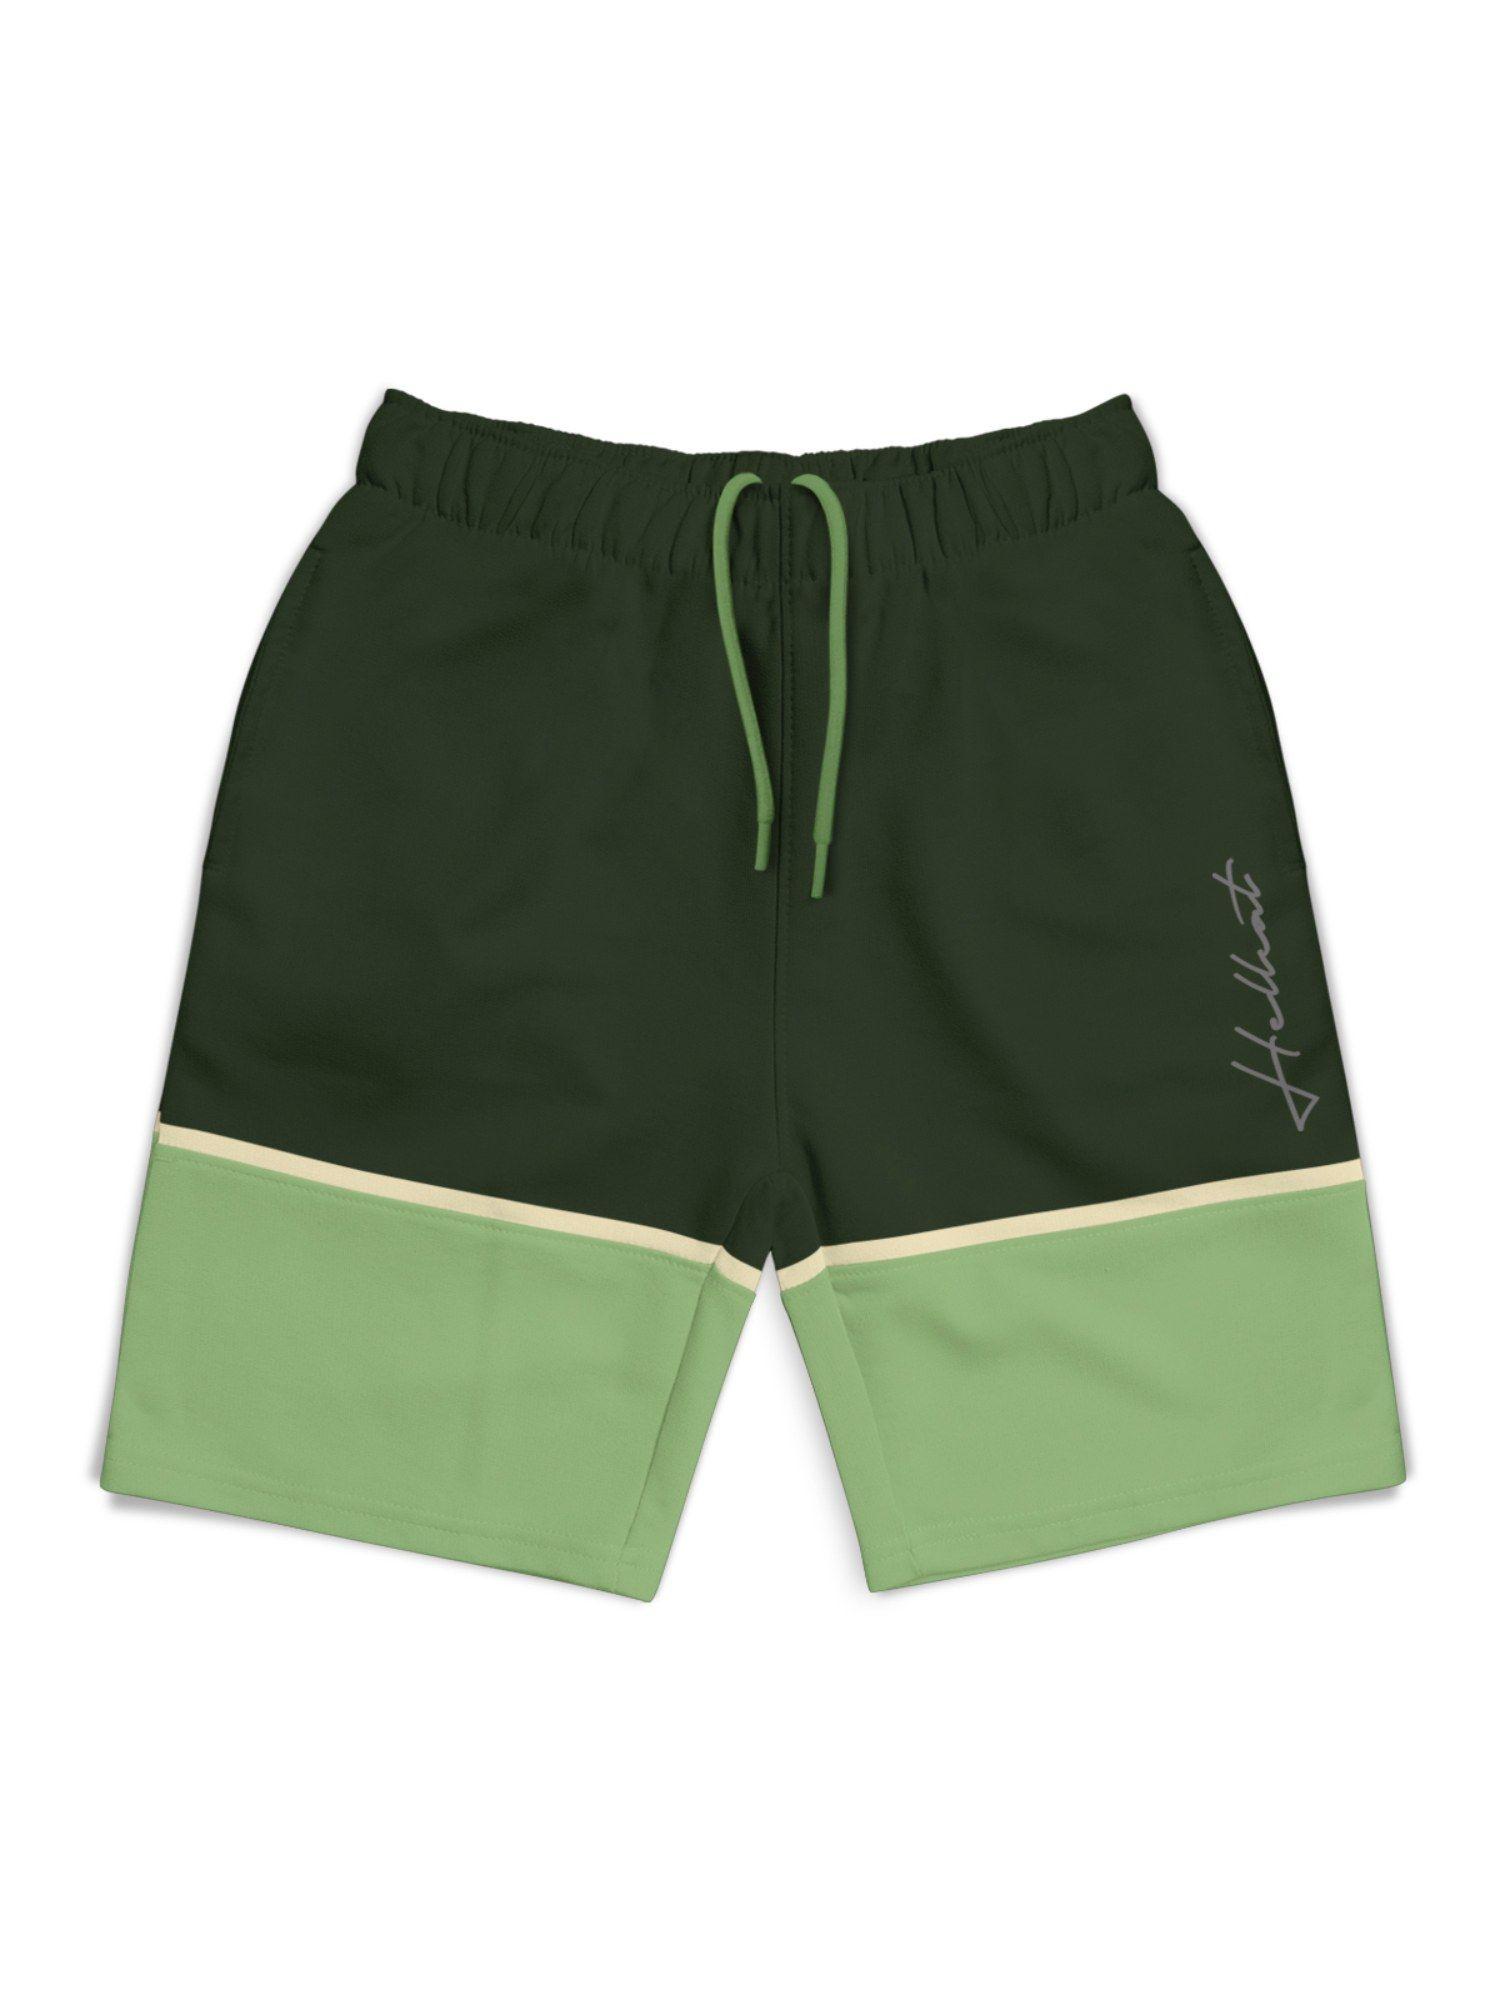 trendy-olive-colorblock-with-branding-printed-shorts